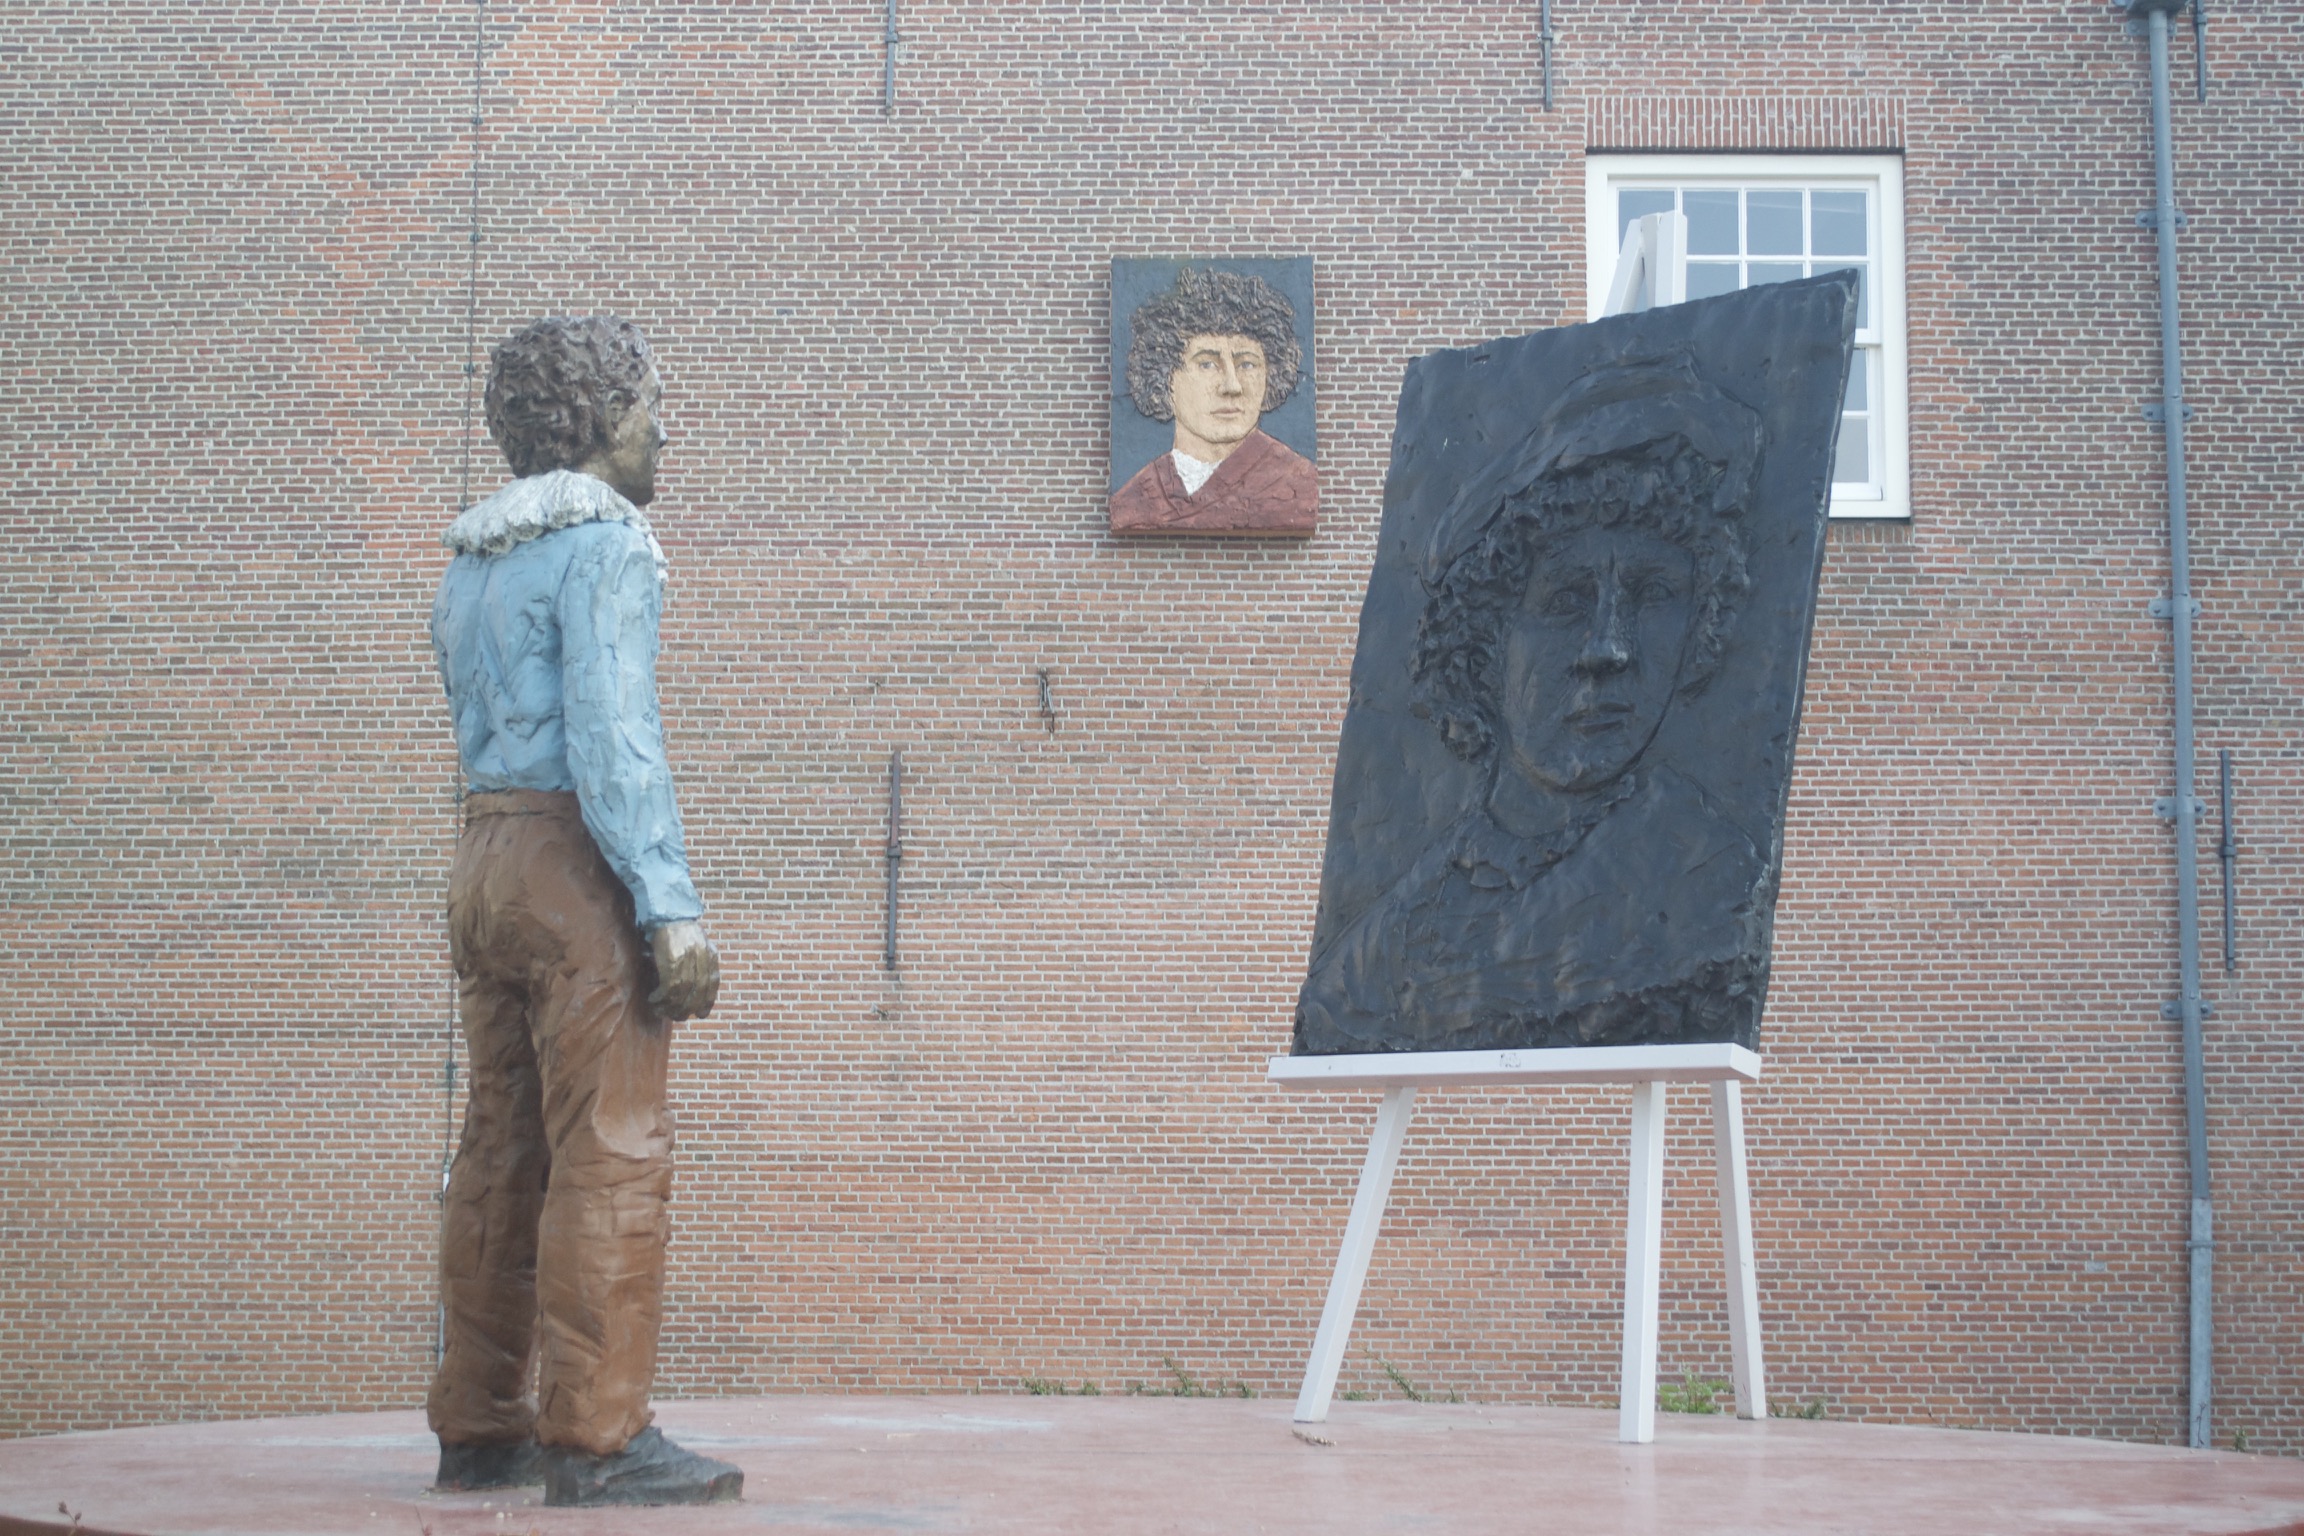 A statue of a man looking at a canvas with another man's face.  That same image hangs on a wall in the background.